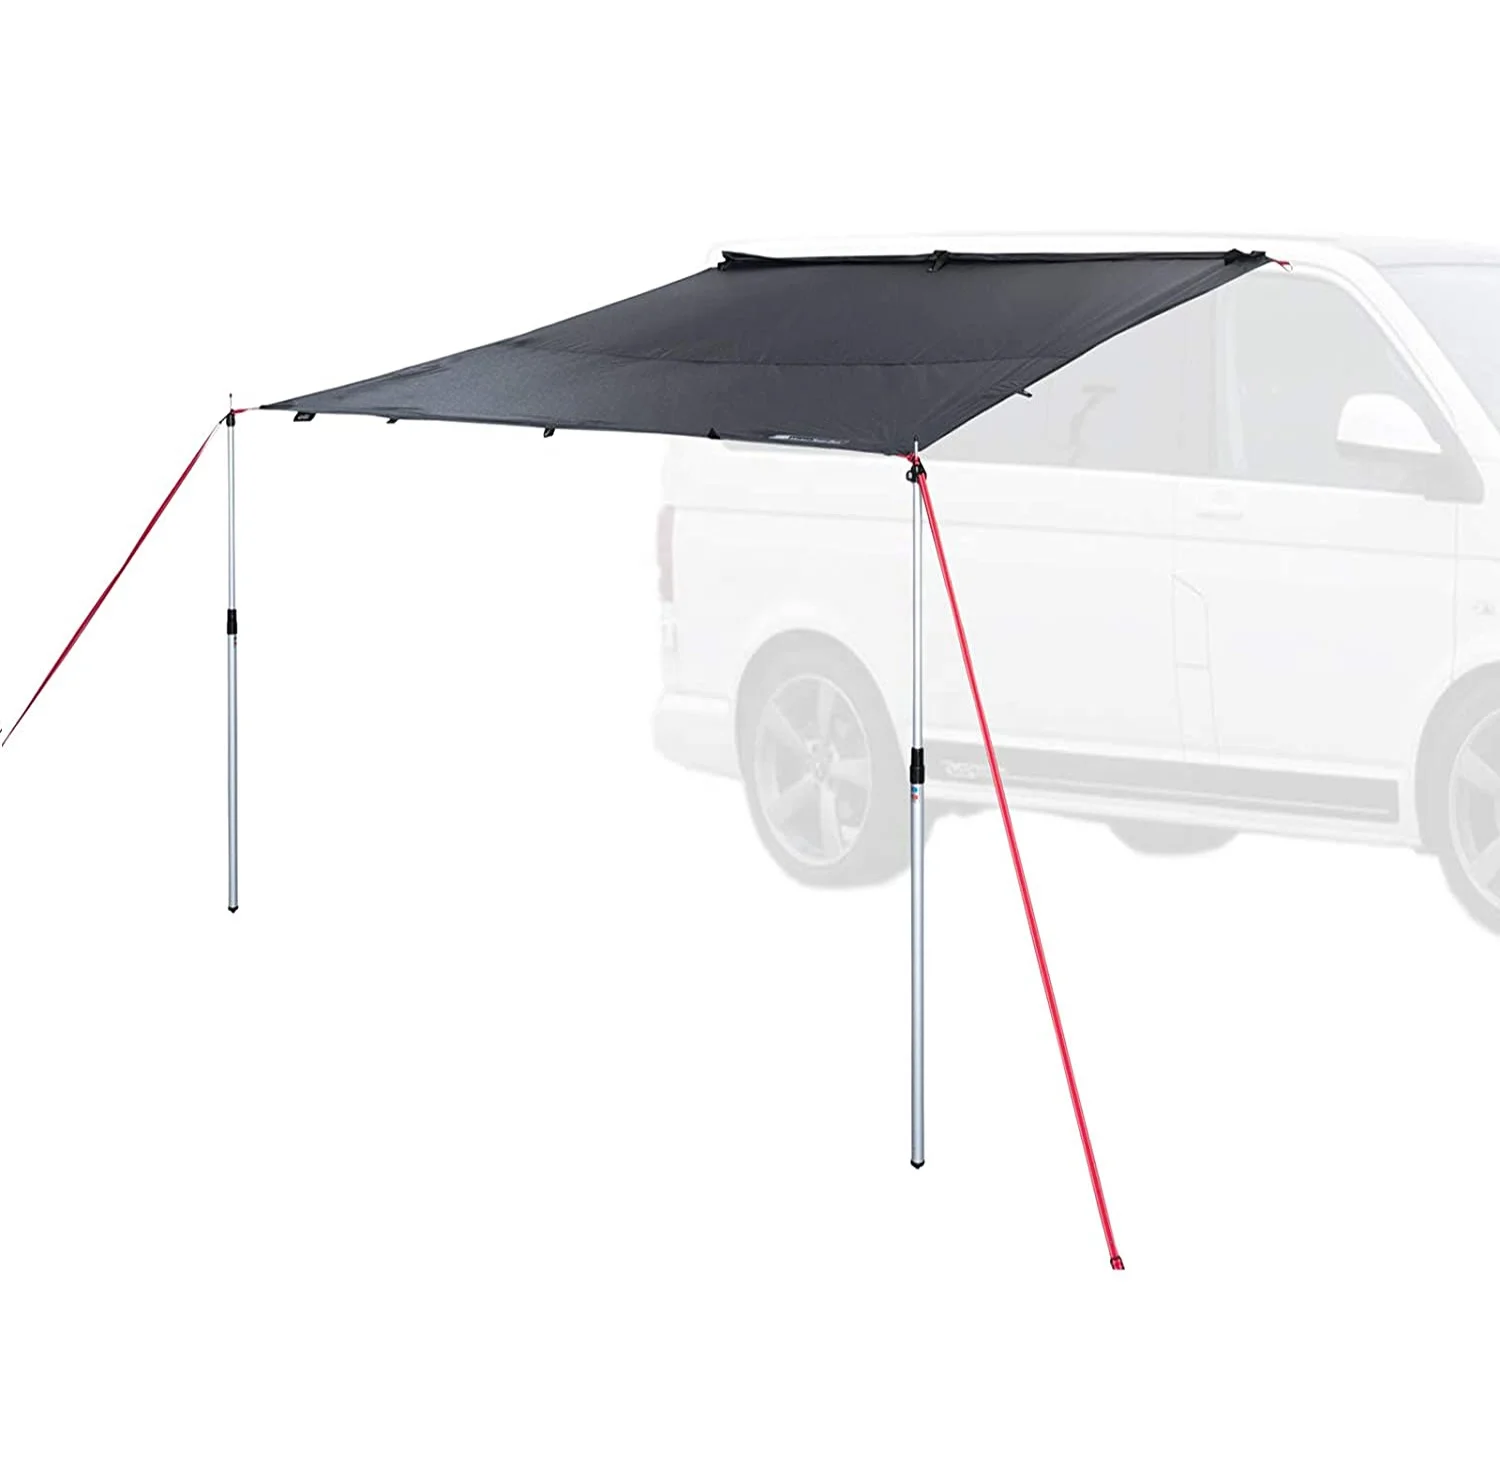 Car Sunshade Tent,Motor Awning For Camper Van,Caravan,Or Bus - Piping Or Suction Cup - Buy Motor Awning,Car Sunshade Tarp Awning For Camper Van Caravan Or Bus on Alibaba.com